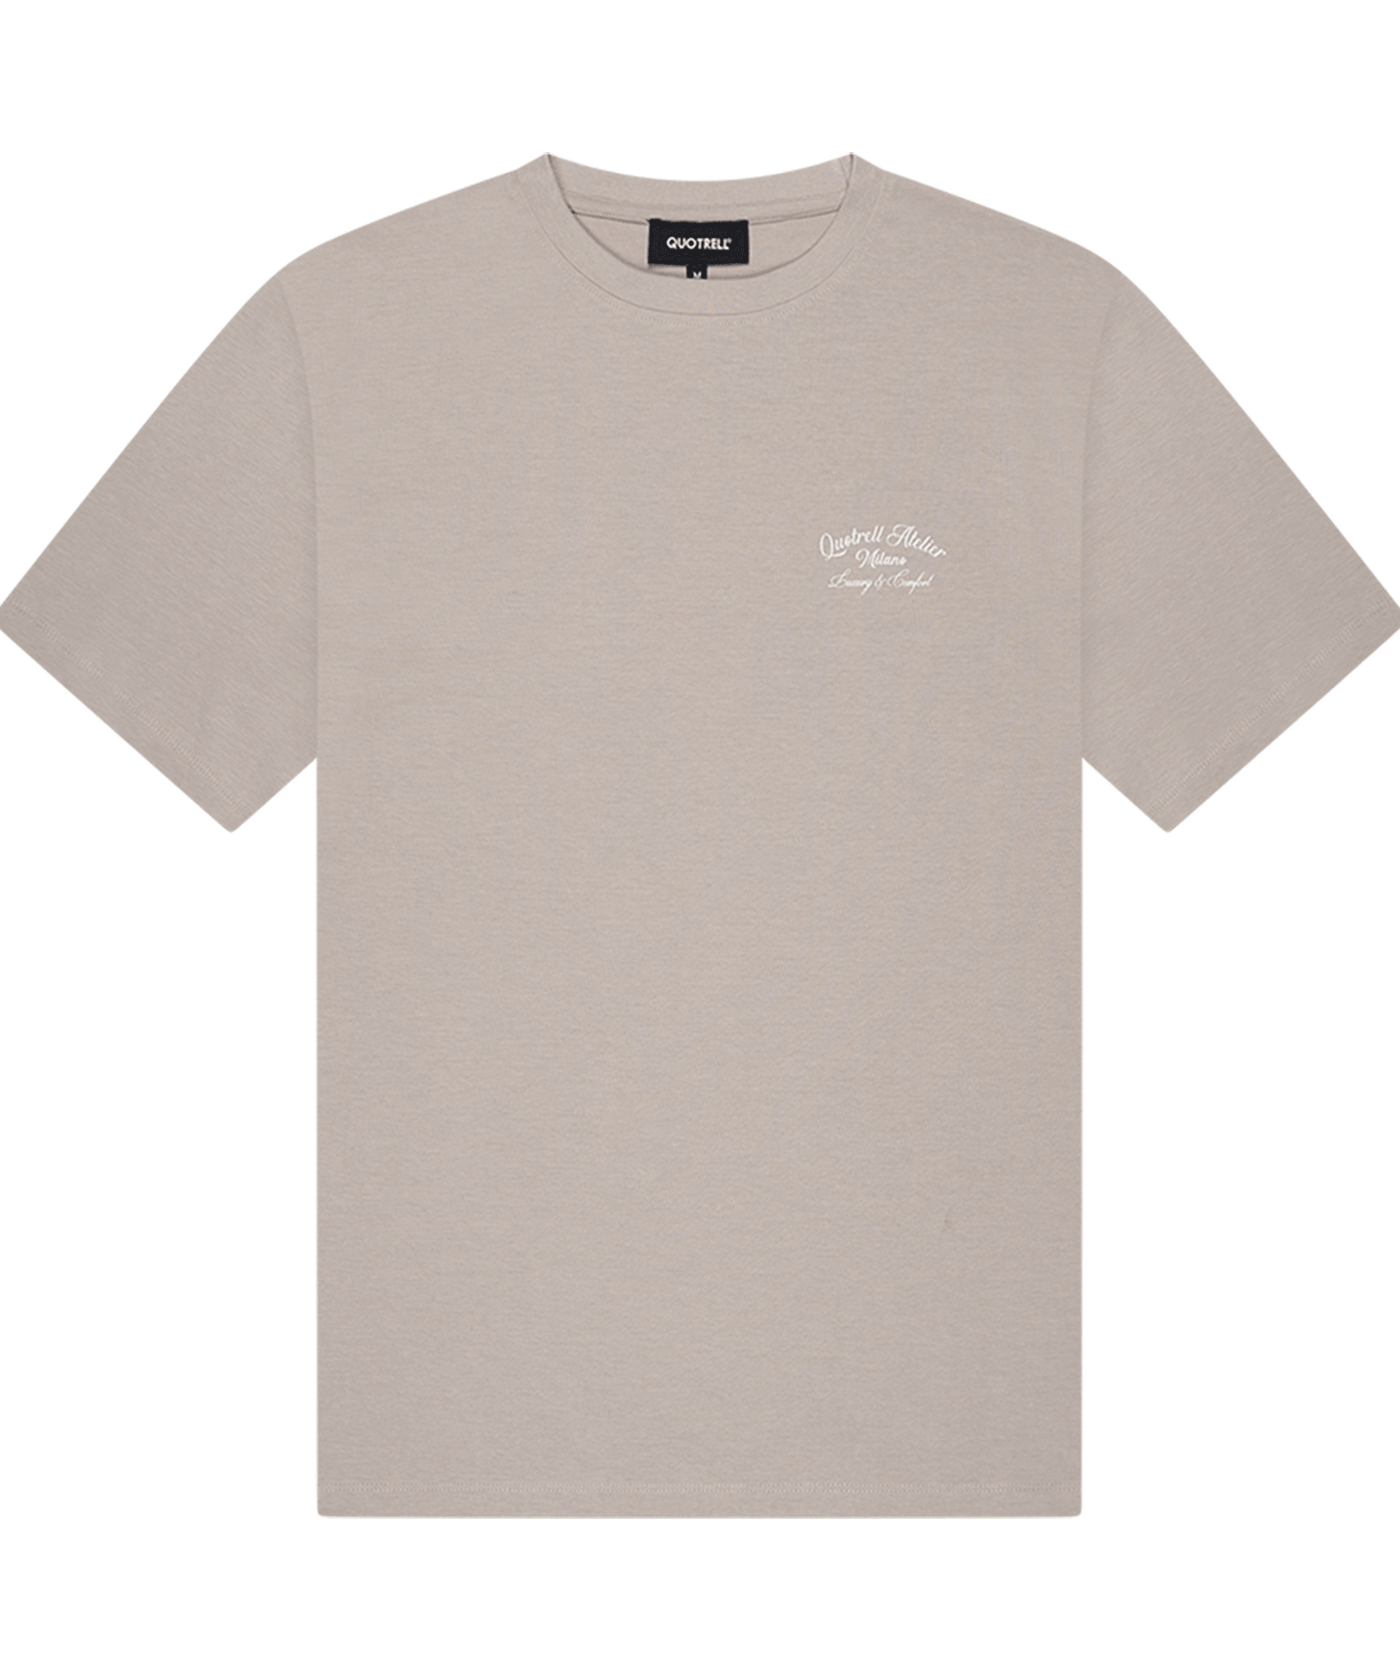 Quotrell - Atelier Milano - T-shirt - Taupe/off White